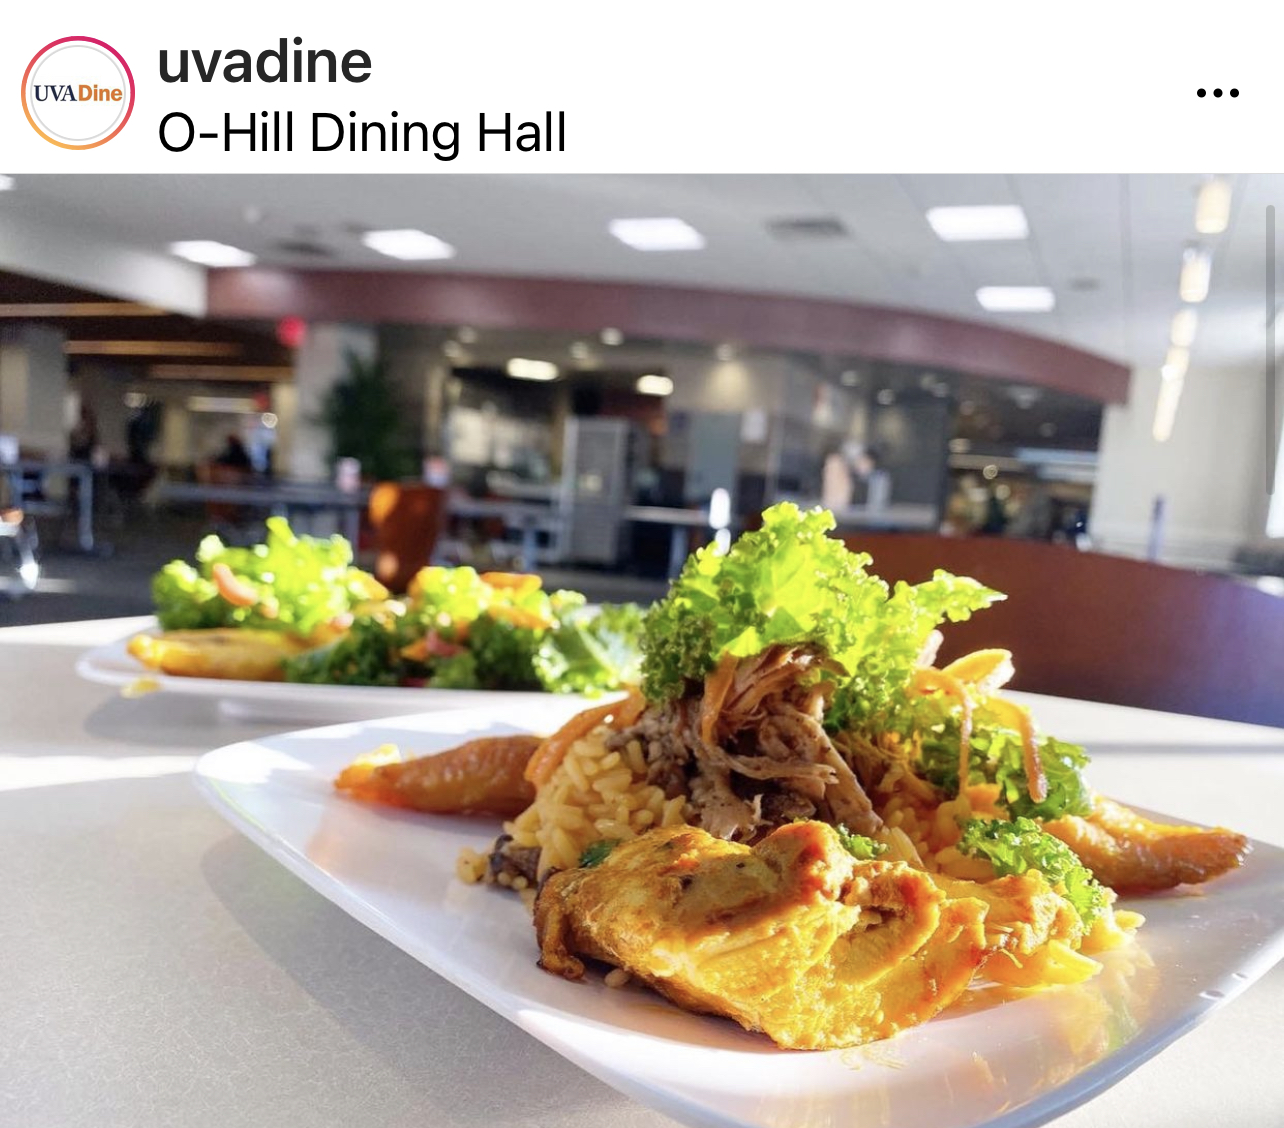 UVADine Cville Pop-up dish from Pearl Island Cafe and Catering